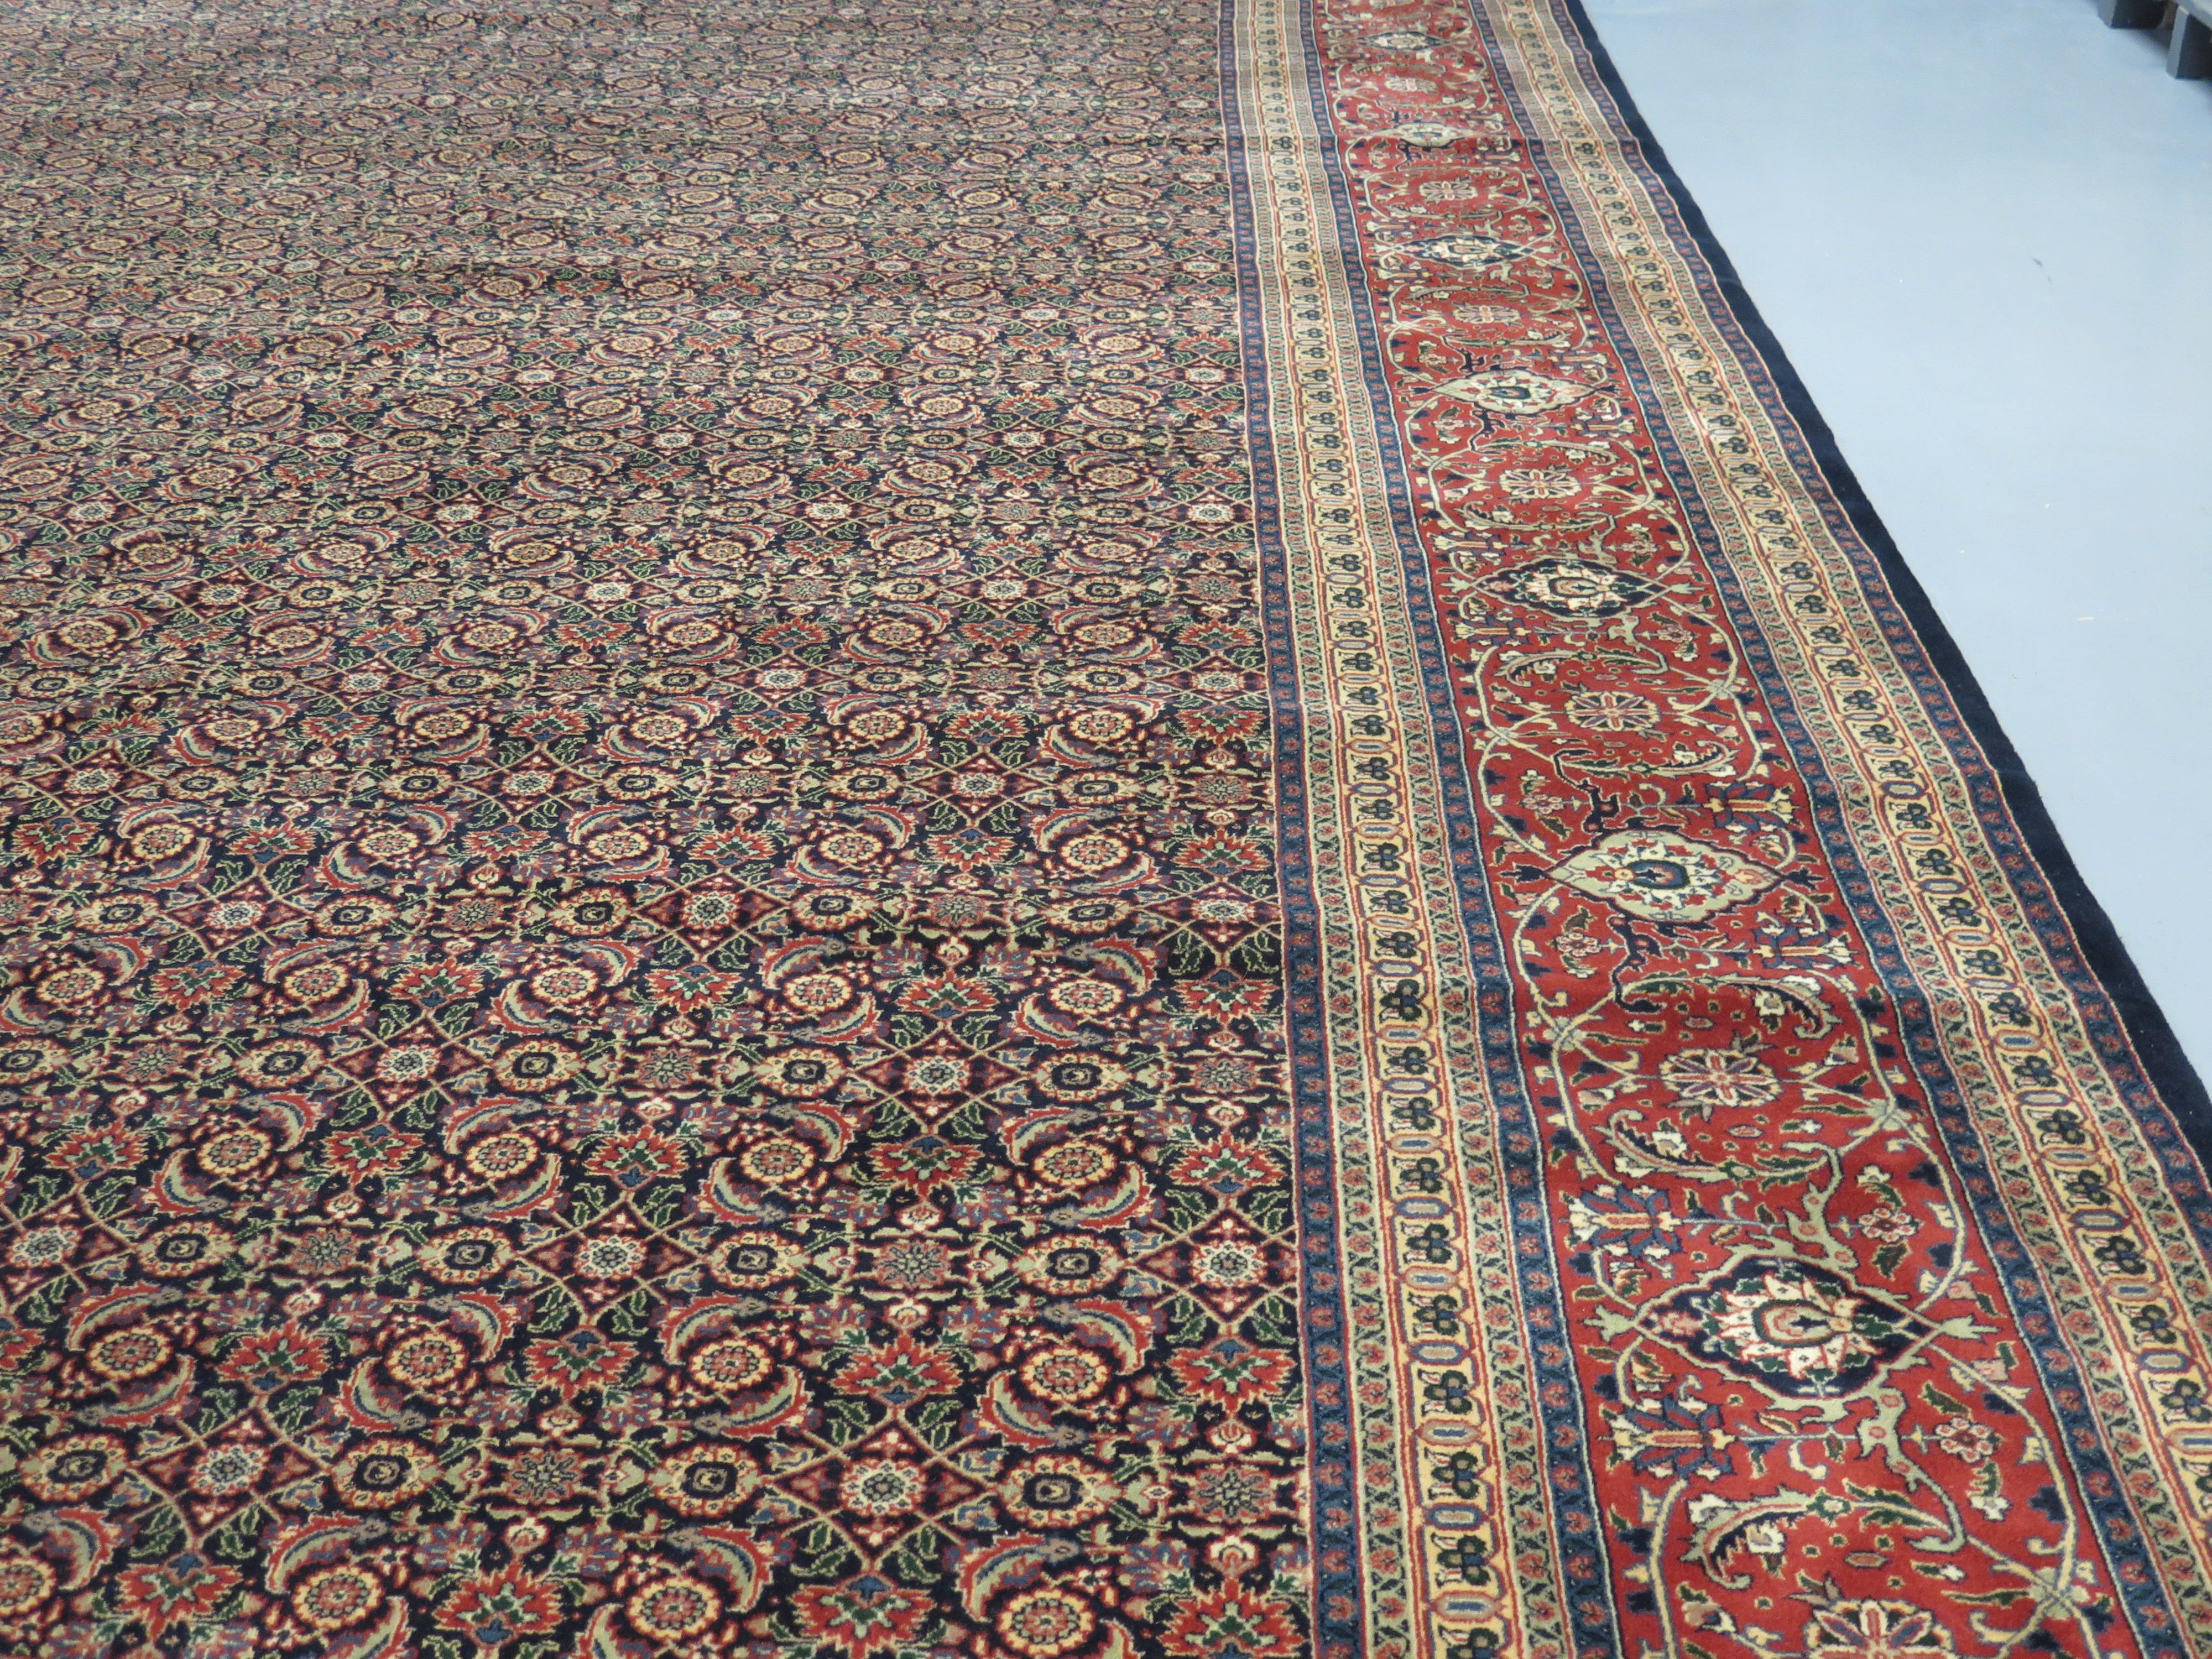 As early as the 16th Century, Persian weavers began settling in India, initially employed by court-sponsored workshops to produce high-quality carpets for the Mughal nobility; this tradition has carried on for centuries, with Indian workshops